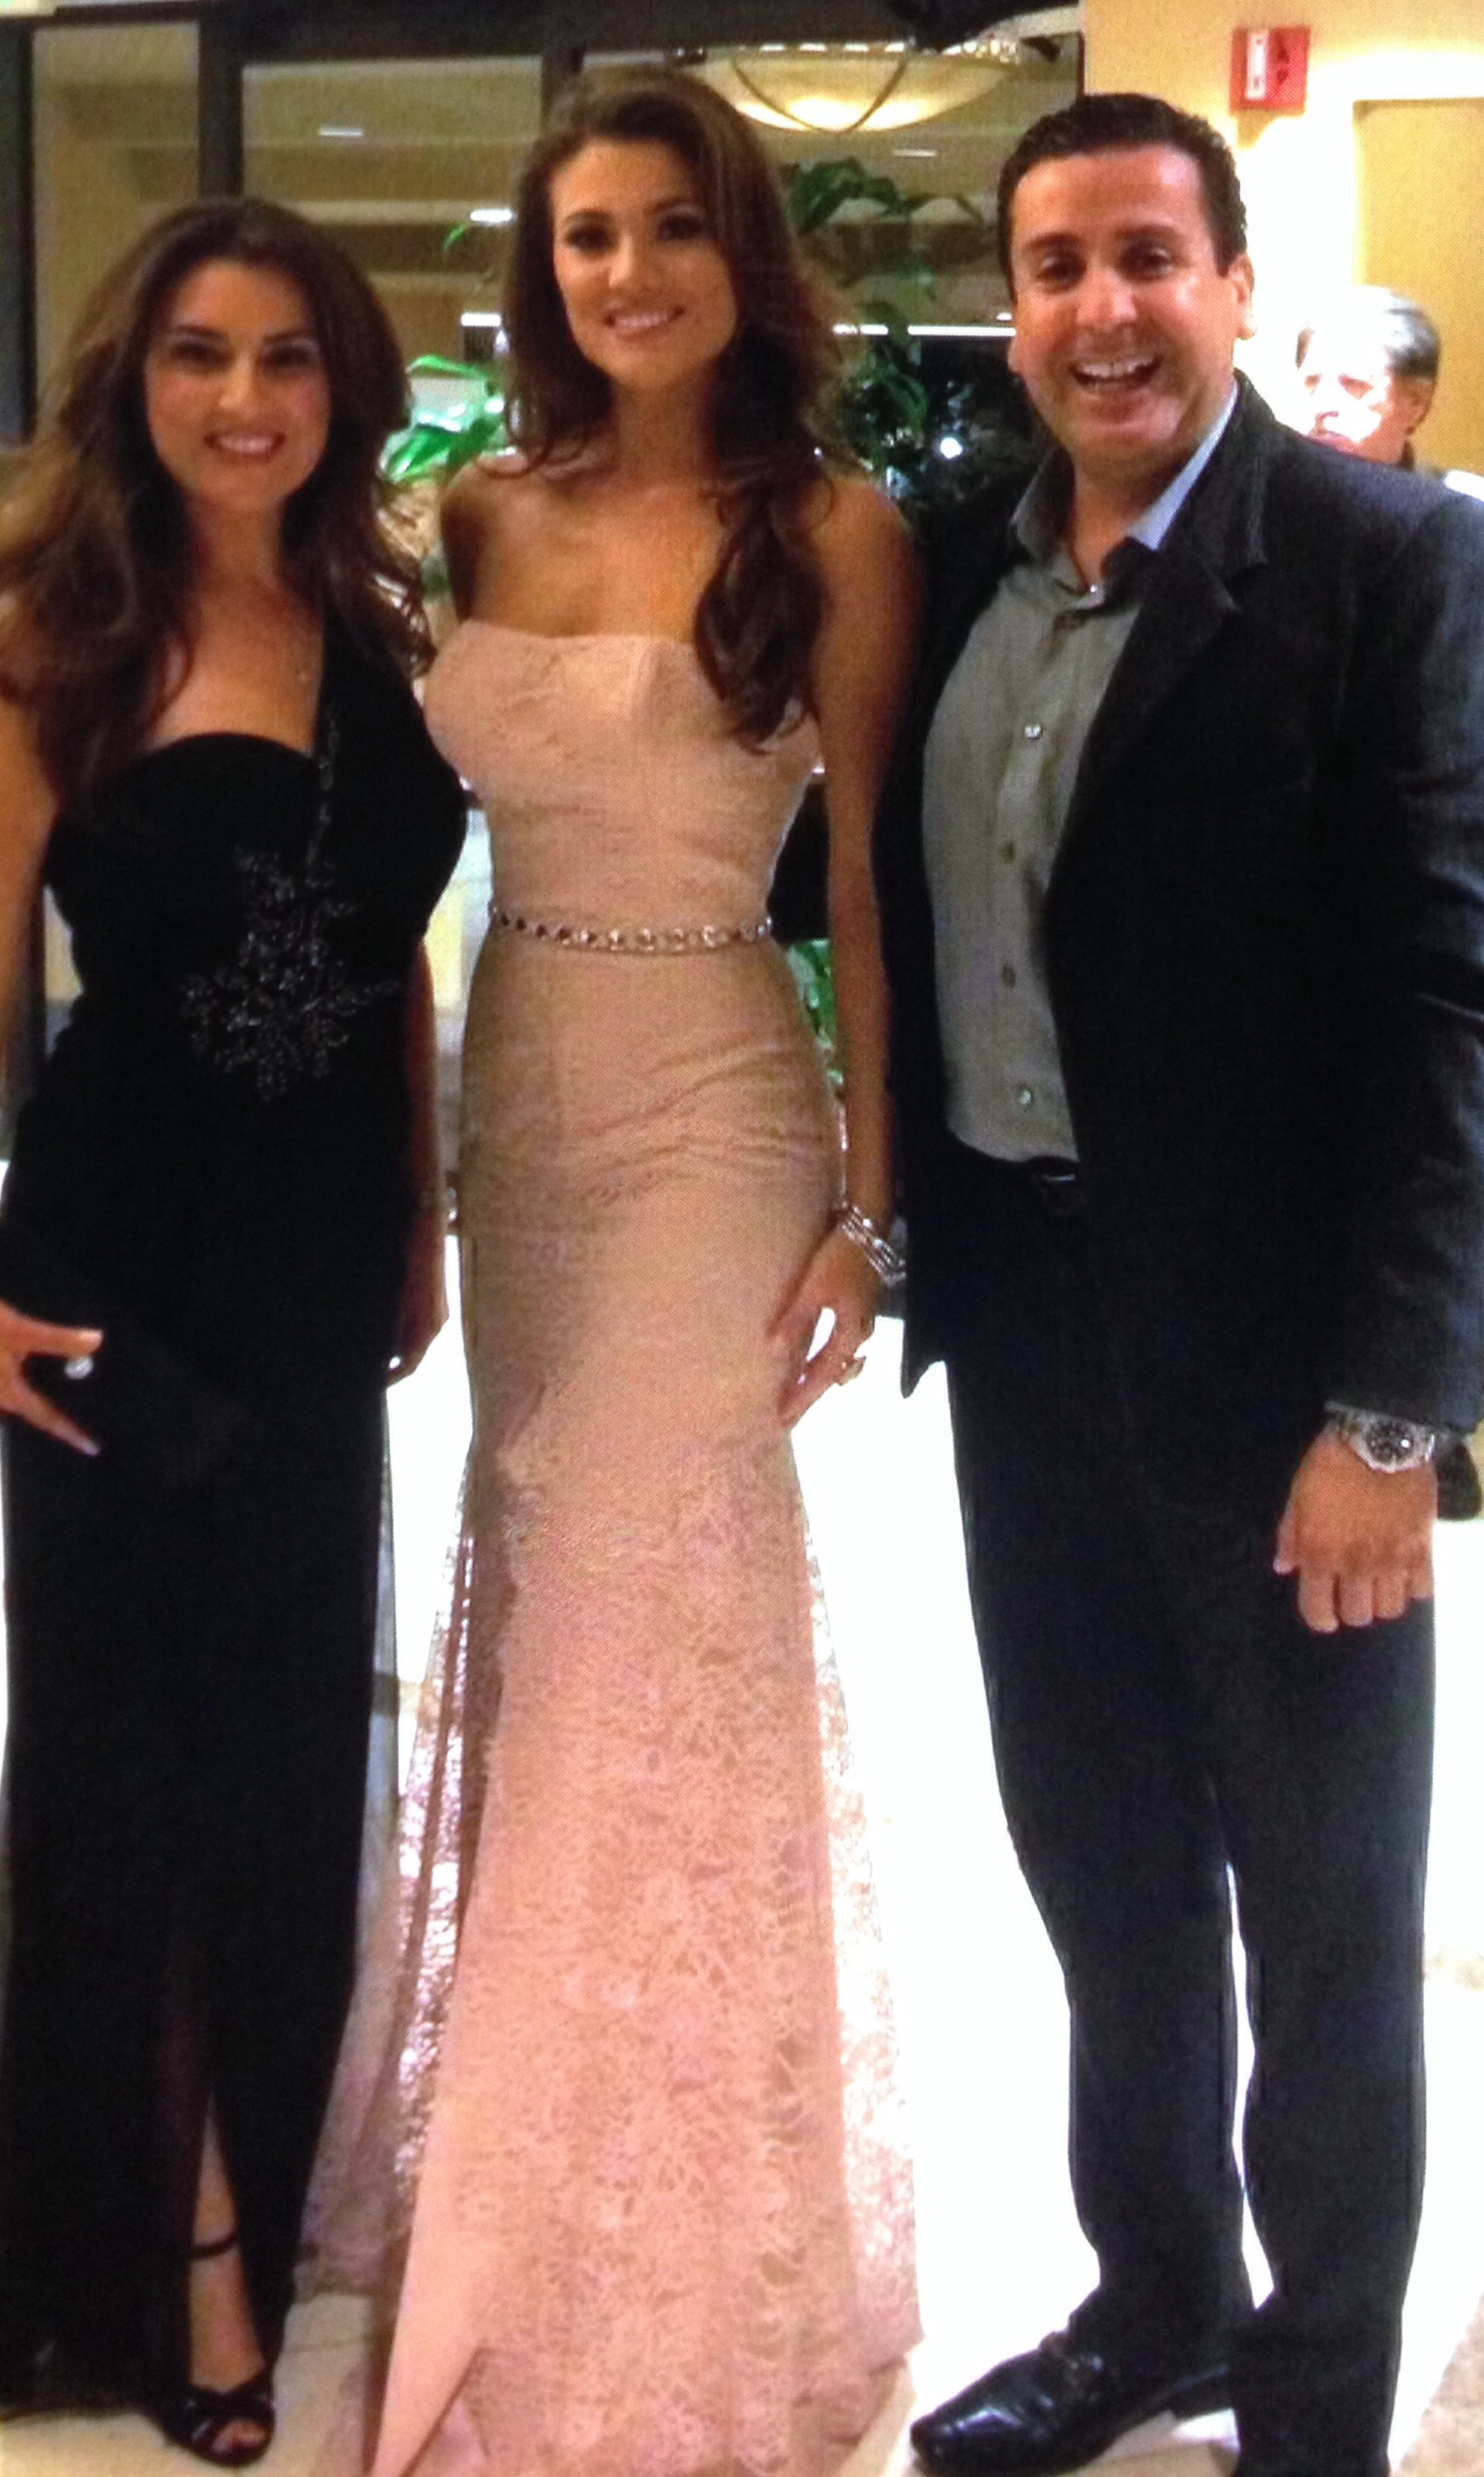 With friend, from Ecuador, current 2nd runner up Miss Universe, Constanza Báez and Wife Sara.